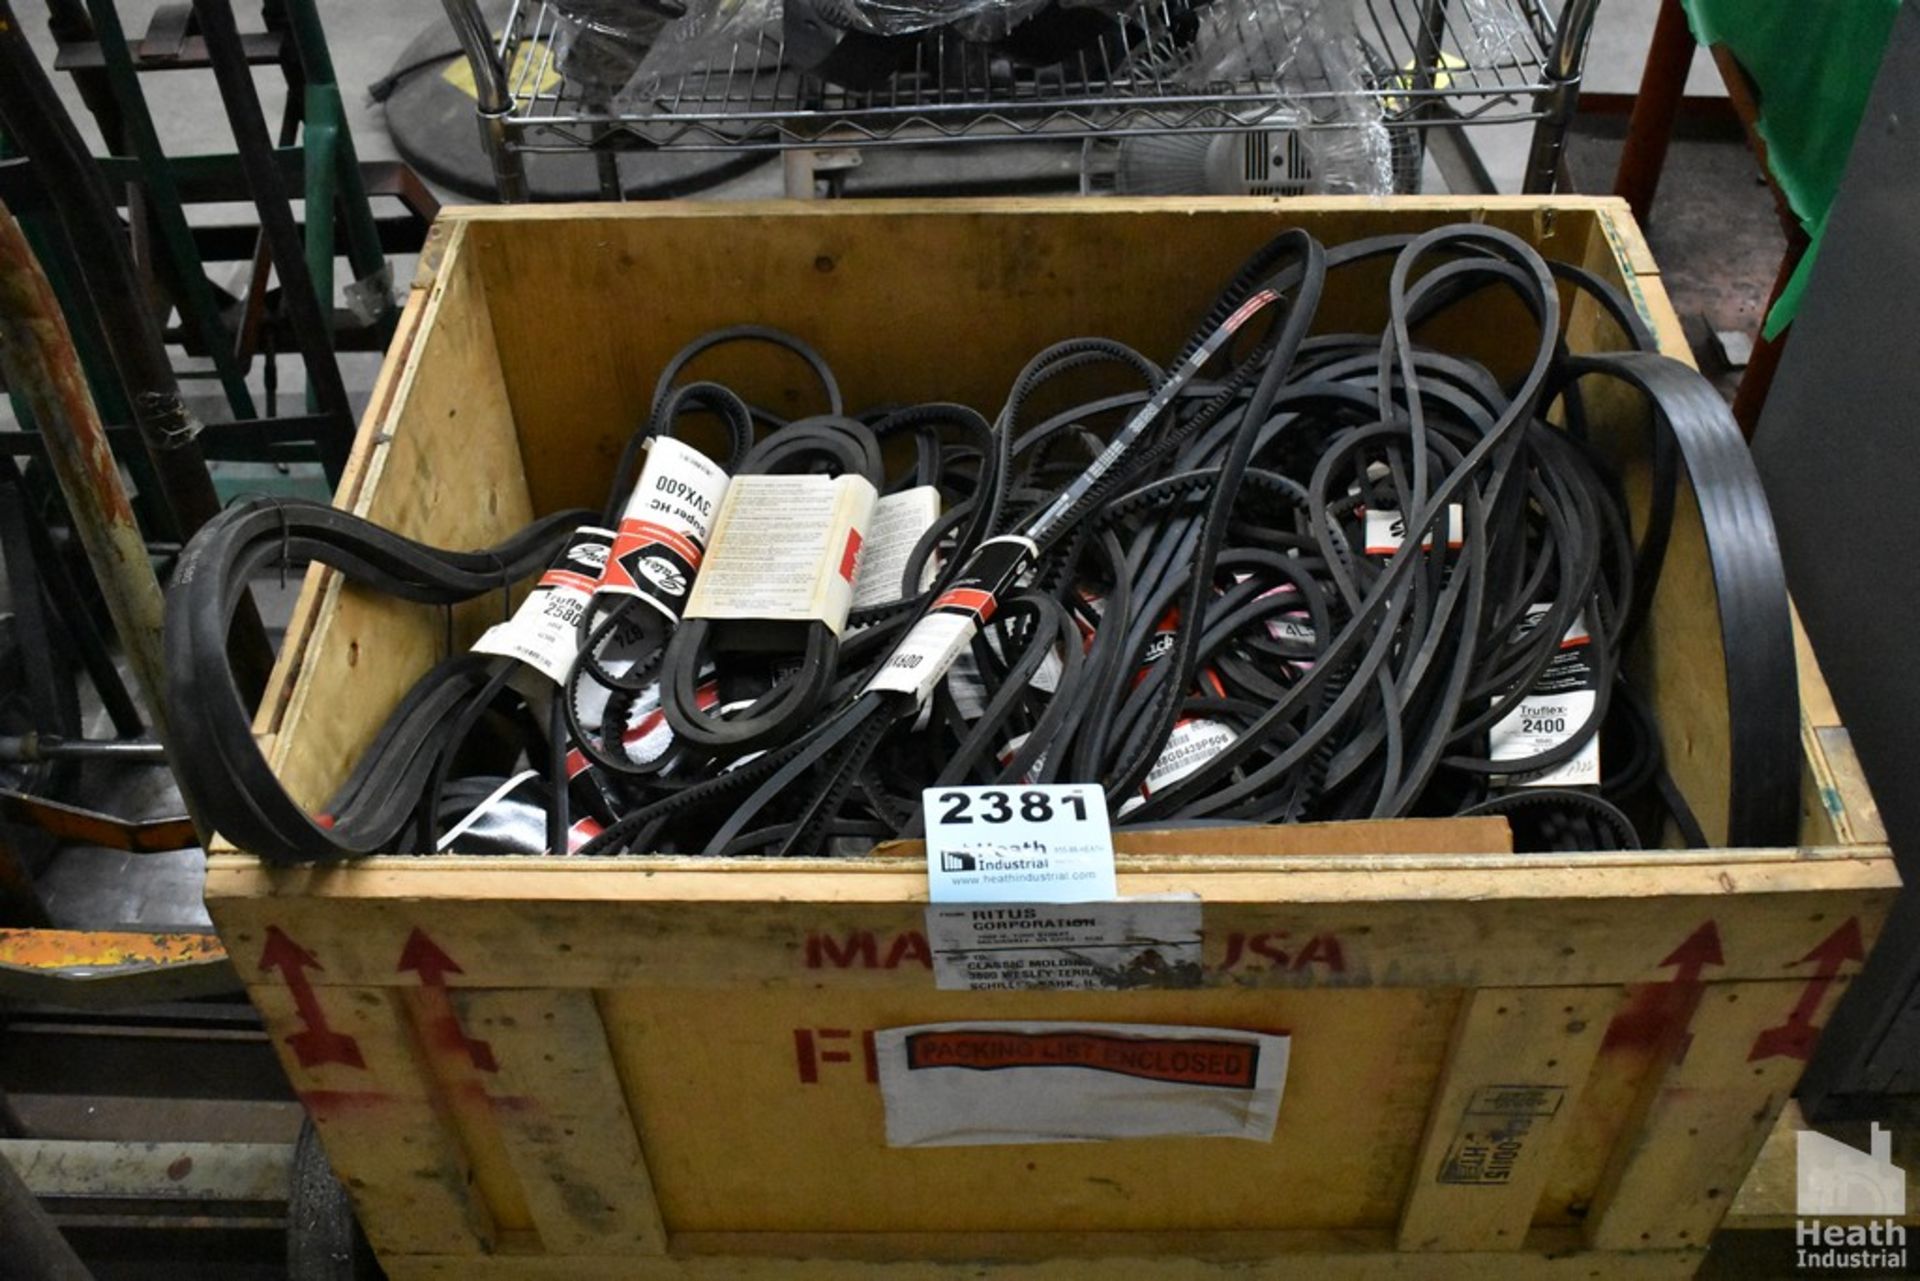 LARGE QUANTITY OF FAN BELTS IN CRATE